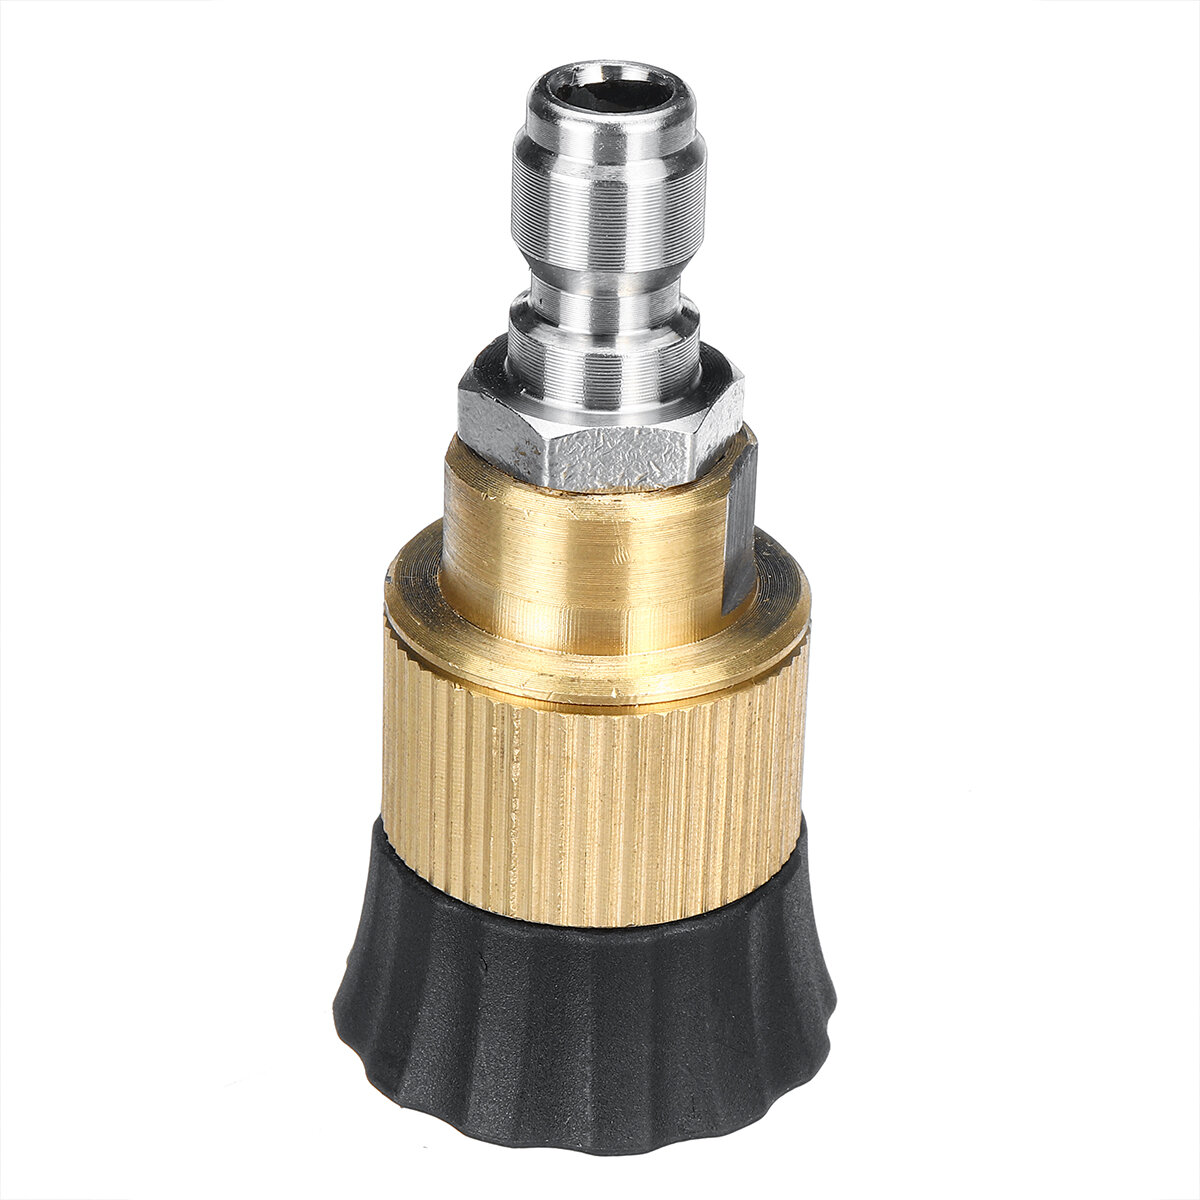 

High Pressure Washer Gutter Cleaner Attachment Spray Nozzle for Lance Wand 1/4 Inch Quick Connect